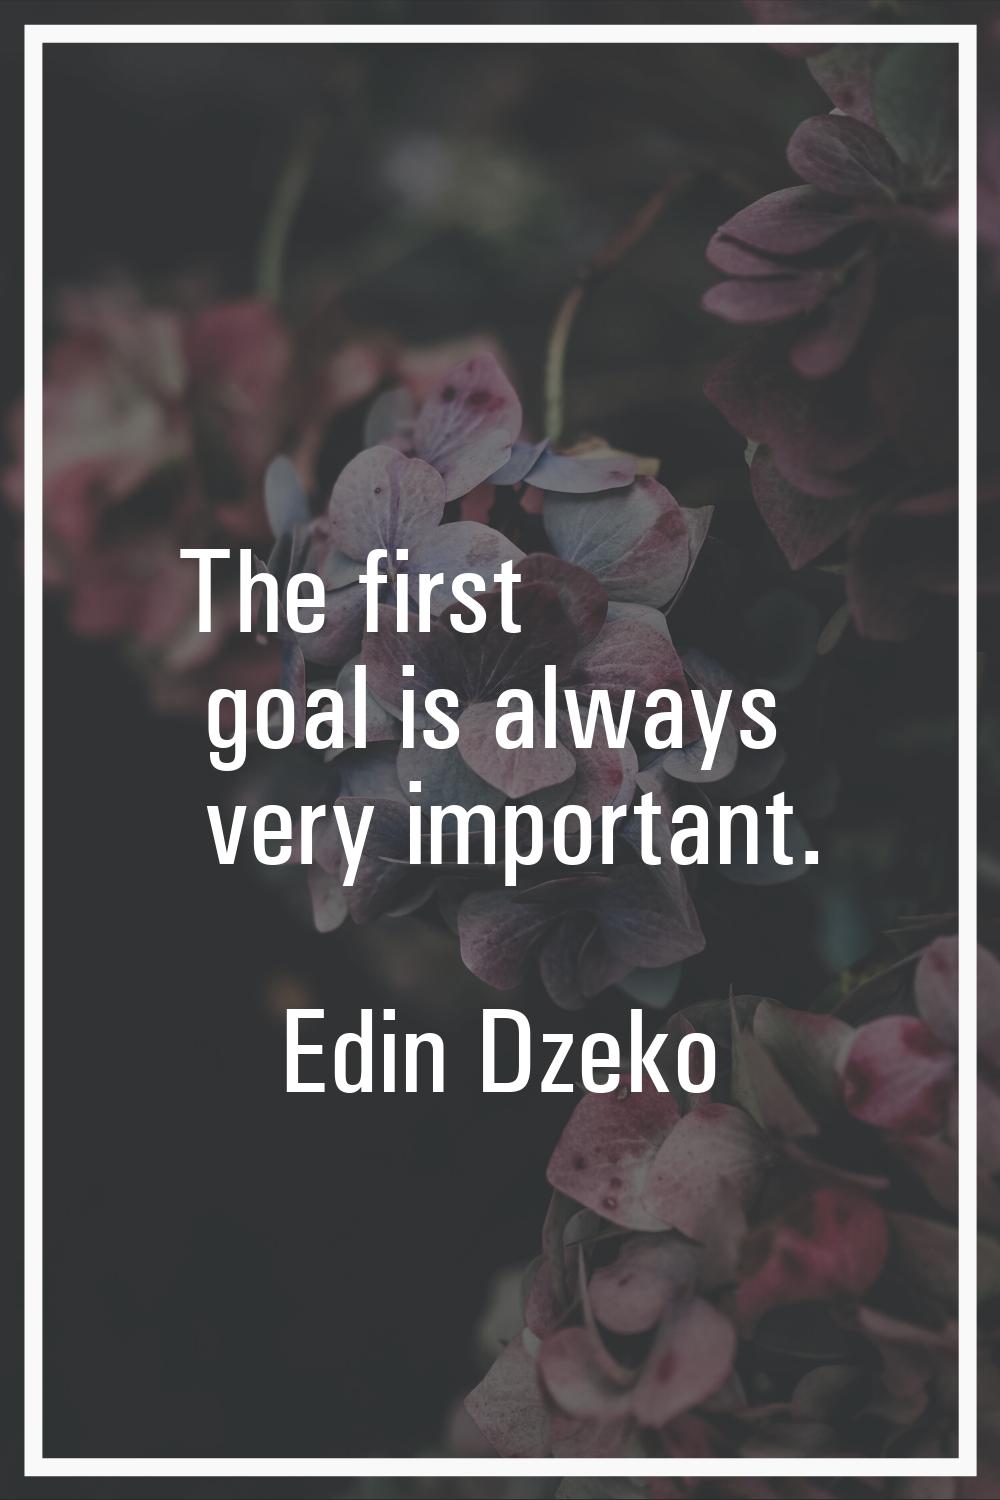 The first goal is always very important.